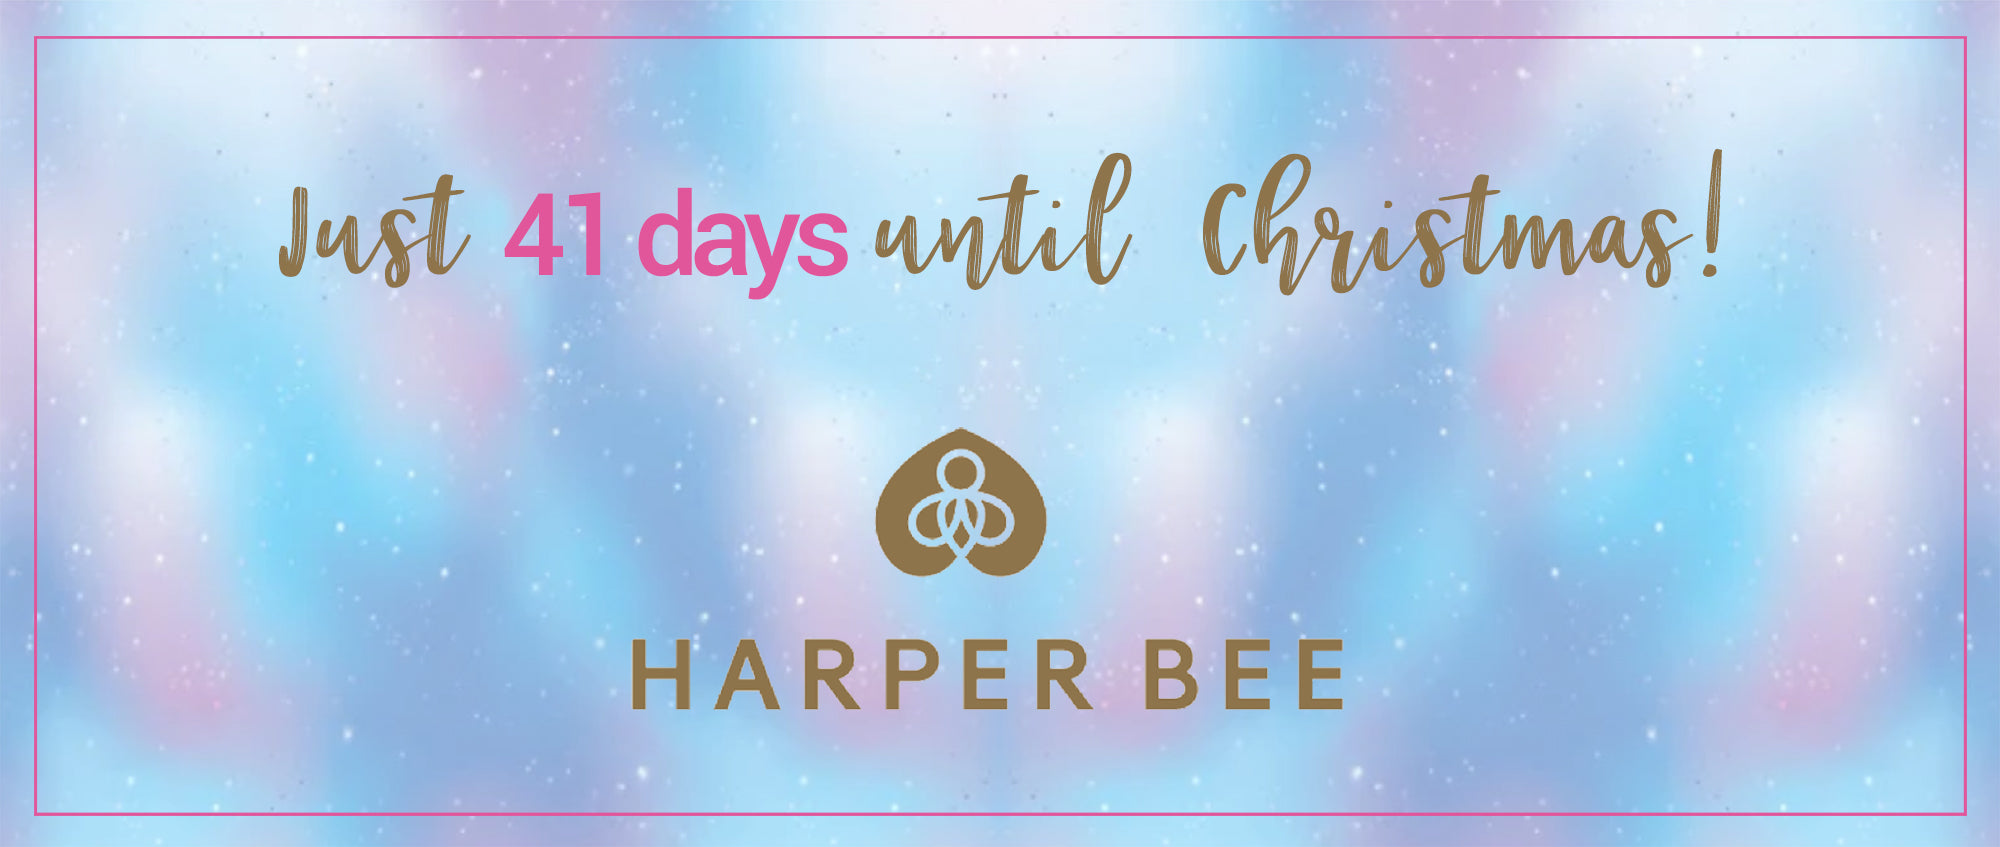 Harper Bee gift packs are the best choice for your tween this Christmas!